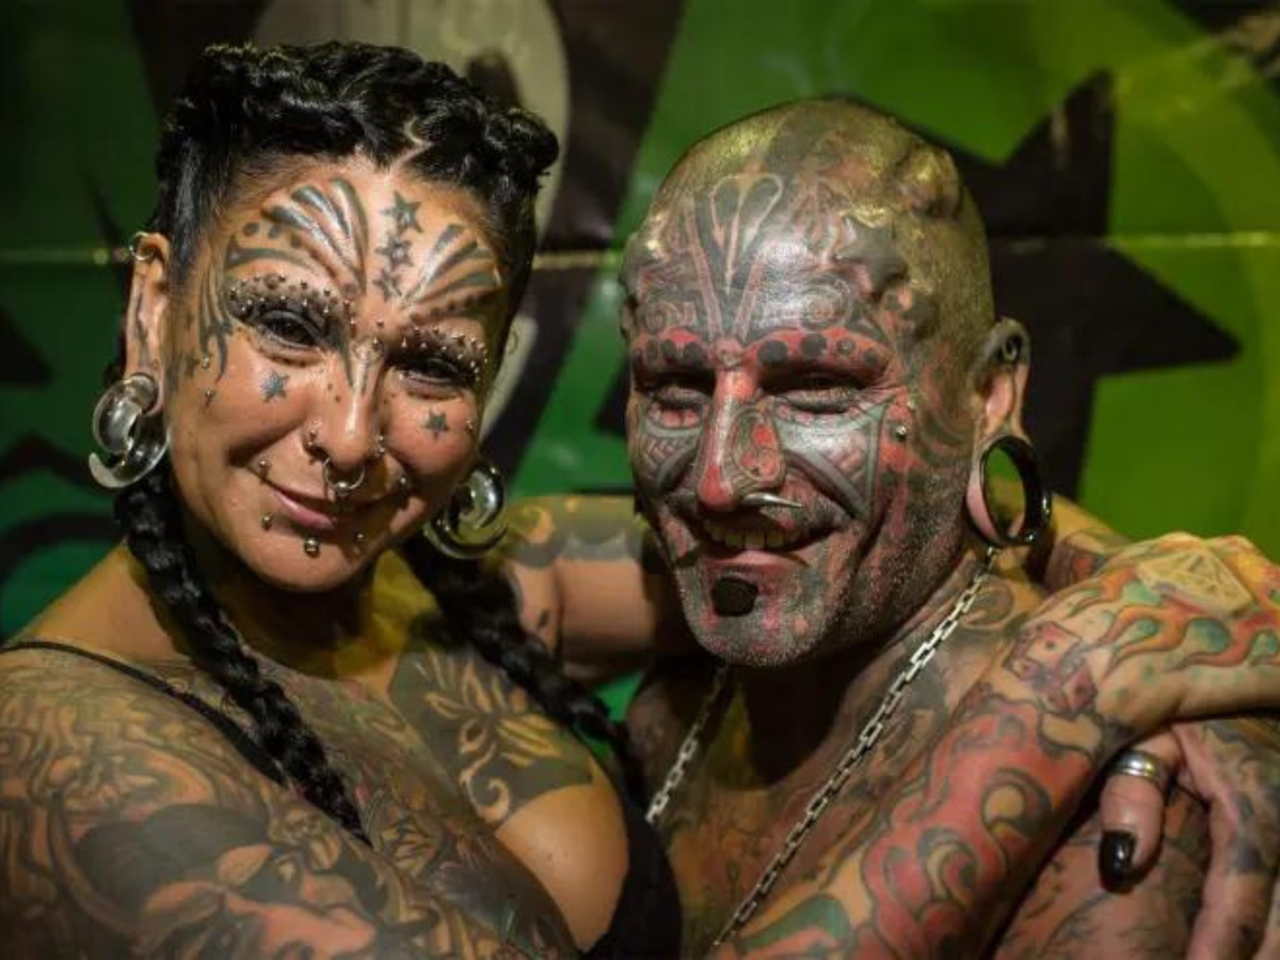 RJ - Rio de Janeiro - 01/10/2020 - Tattoo Week Rio 2020 - Tattoo Week Rio  2020, the largest tattoo event in Latin America, held at the SulAmerica  Convention Center, in downtown